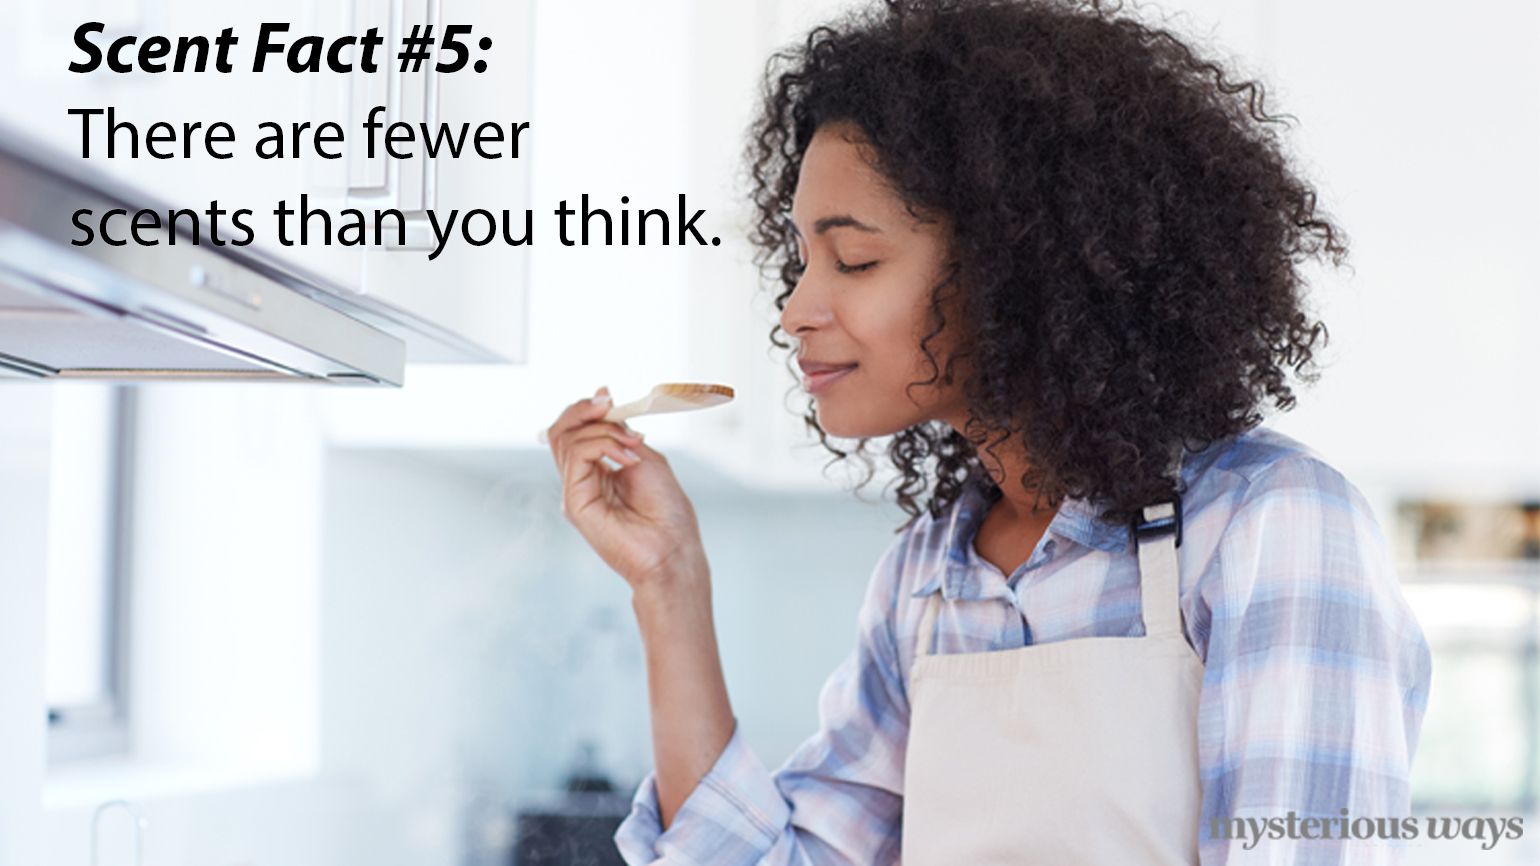 There are fewer scents than you think